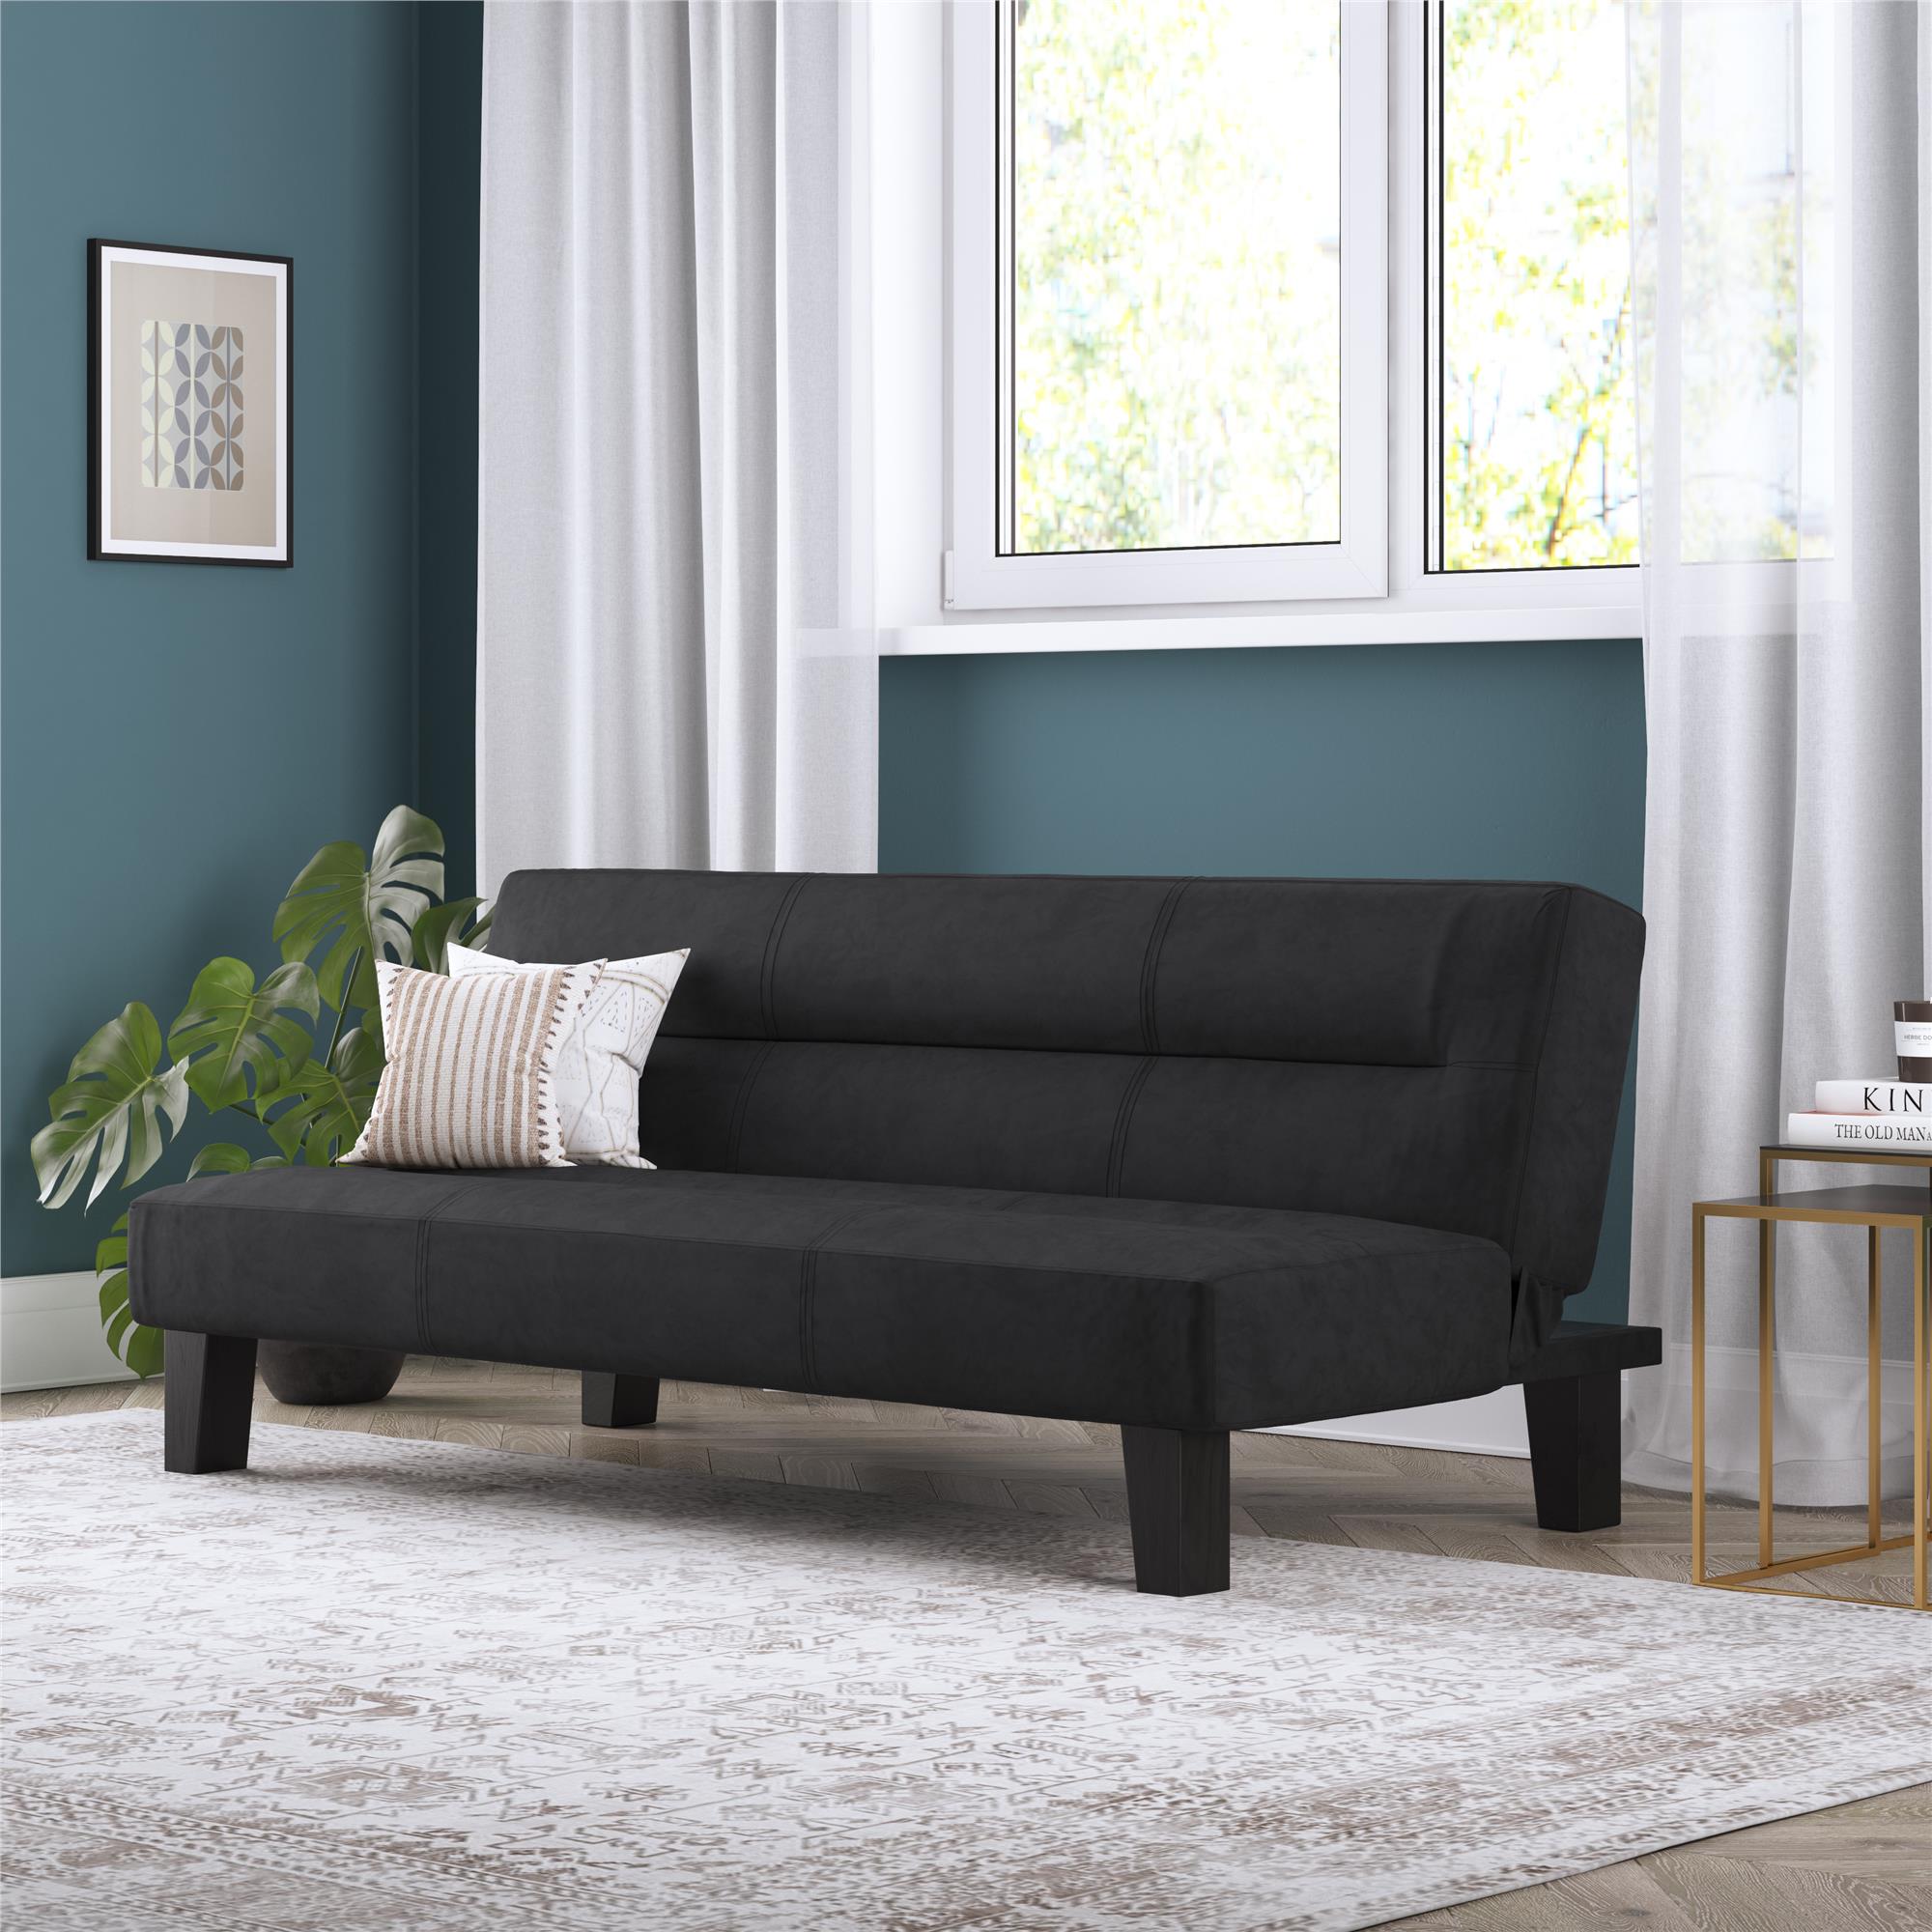 DHP Kebo Futon with Microfiber Cover, Black - image 1 of 15